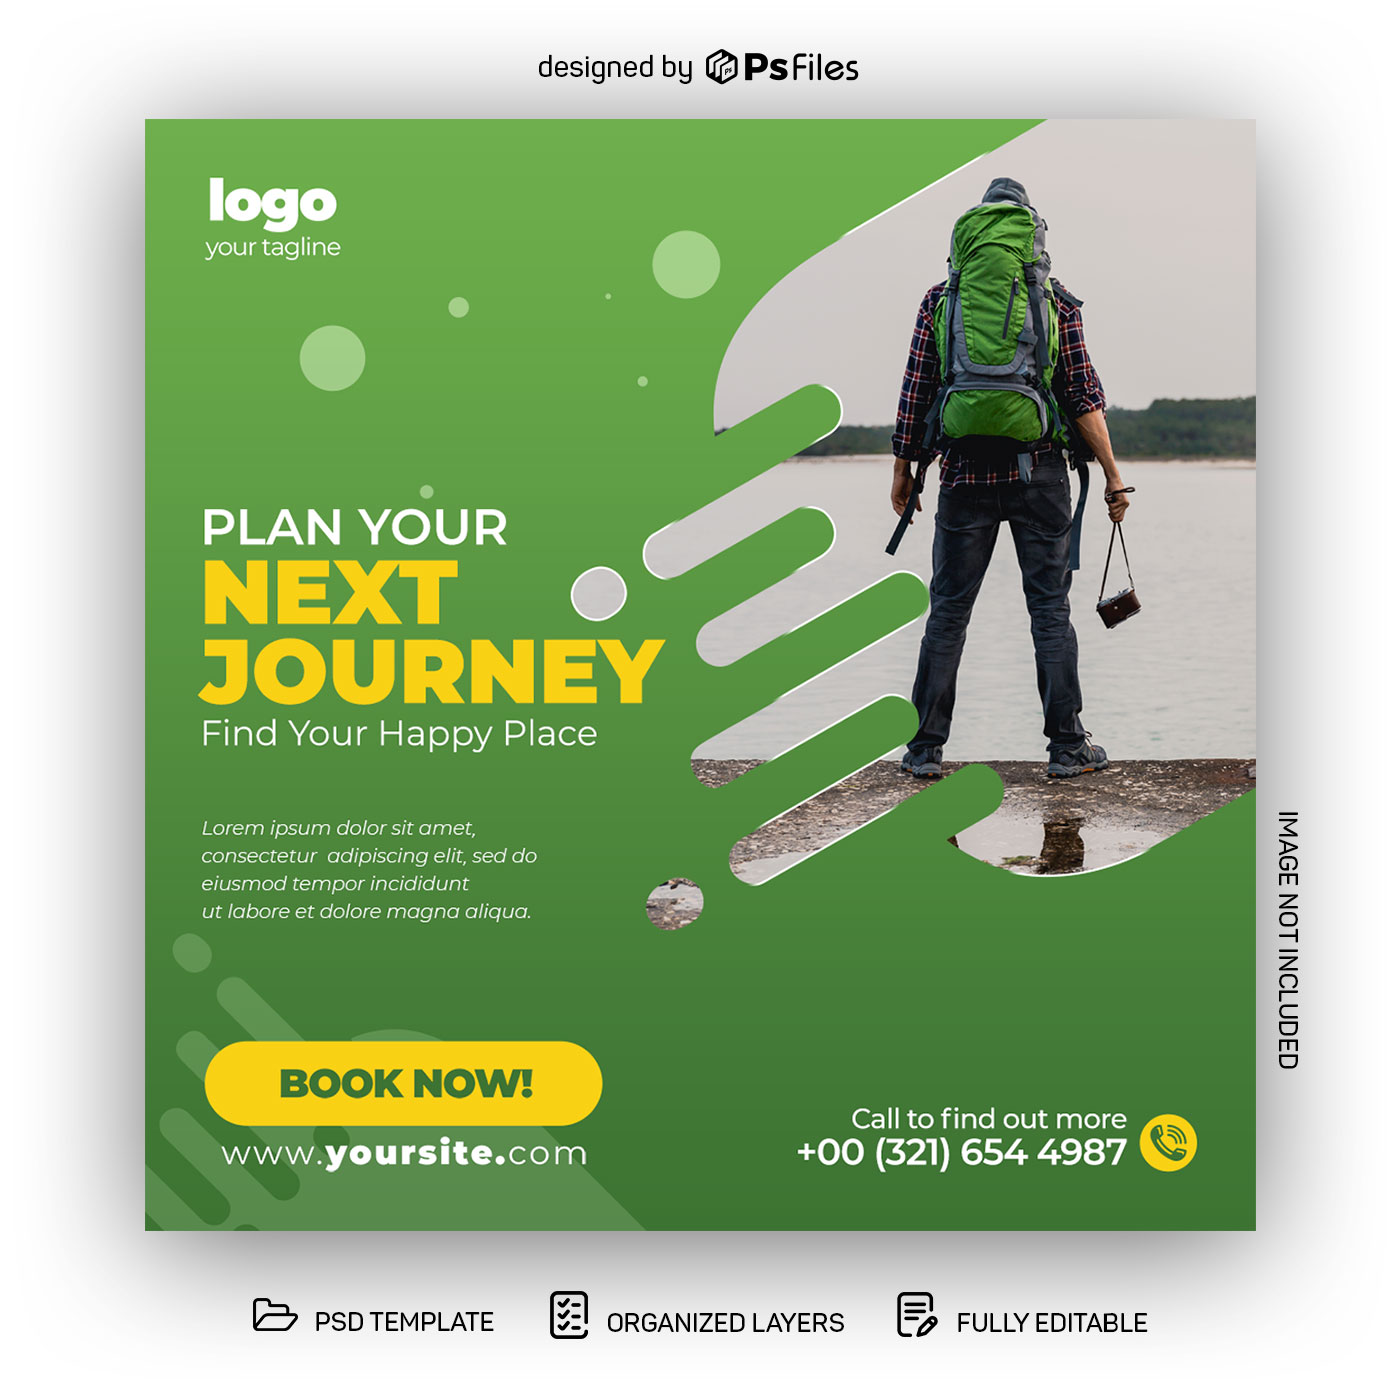 Green Color Free Tour Travel Agency Social Media Post Design PSD Template